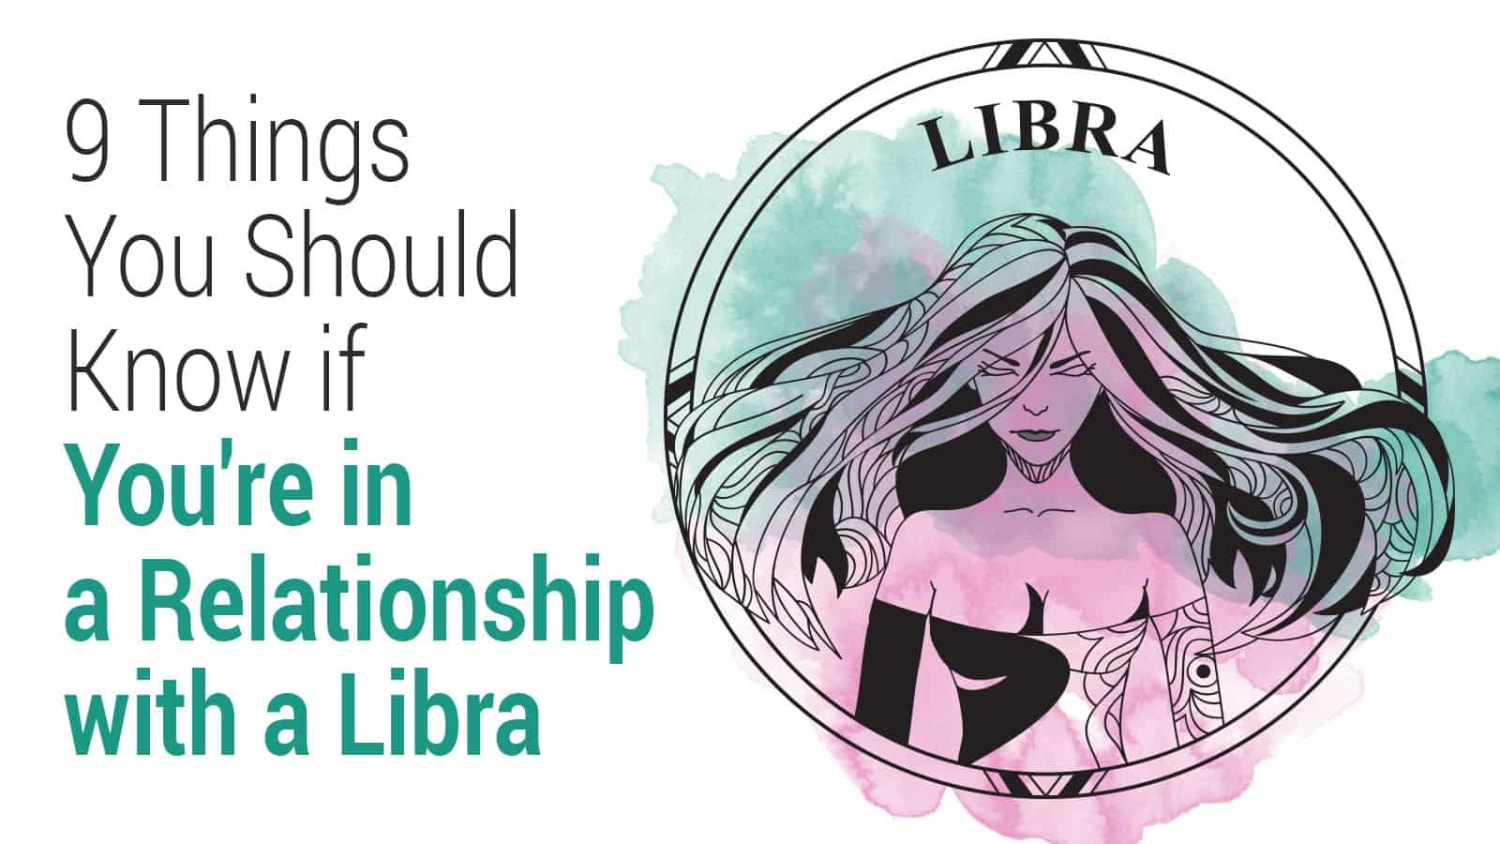 9 Things You Should Know if You're in a Relationship with a Libra